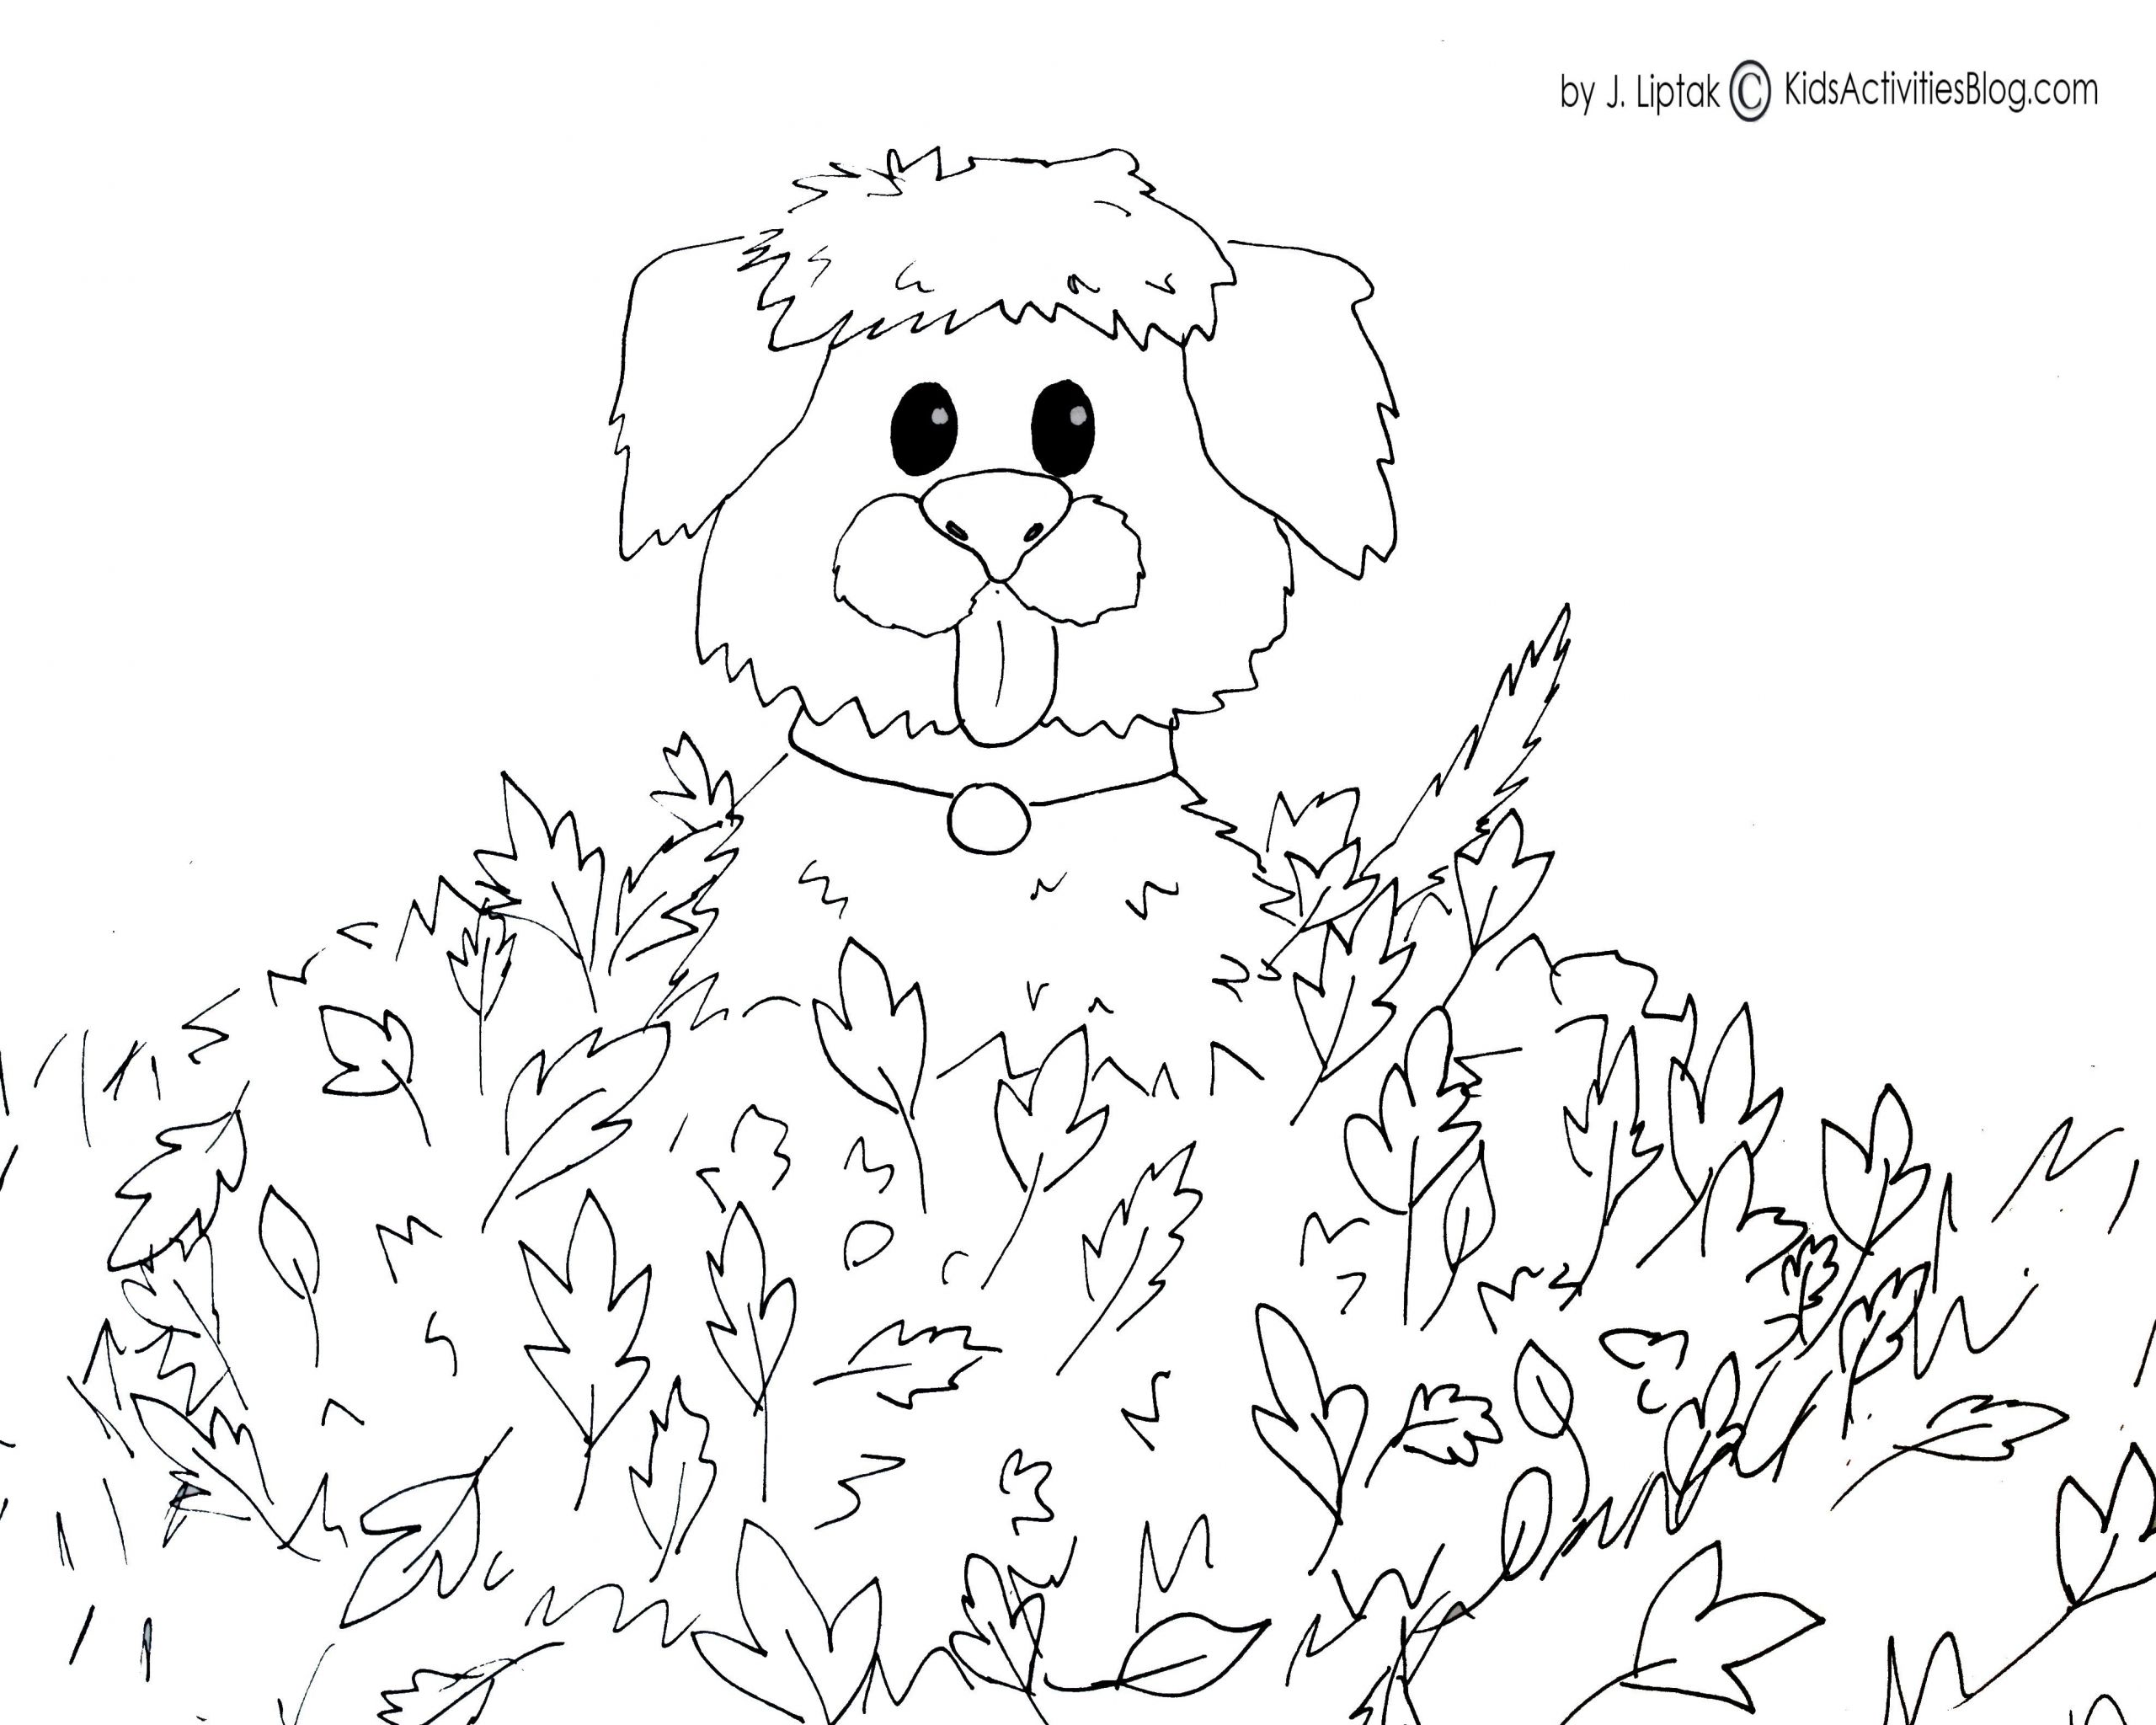 Coloring Pages For Kids Fall
 4 FREE PRINTABLE FALL COLORING PAGES Kids Activities